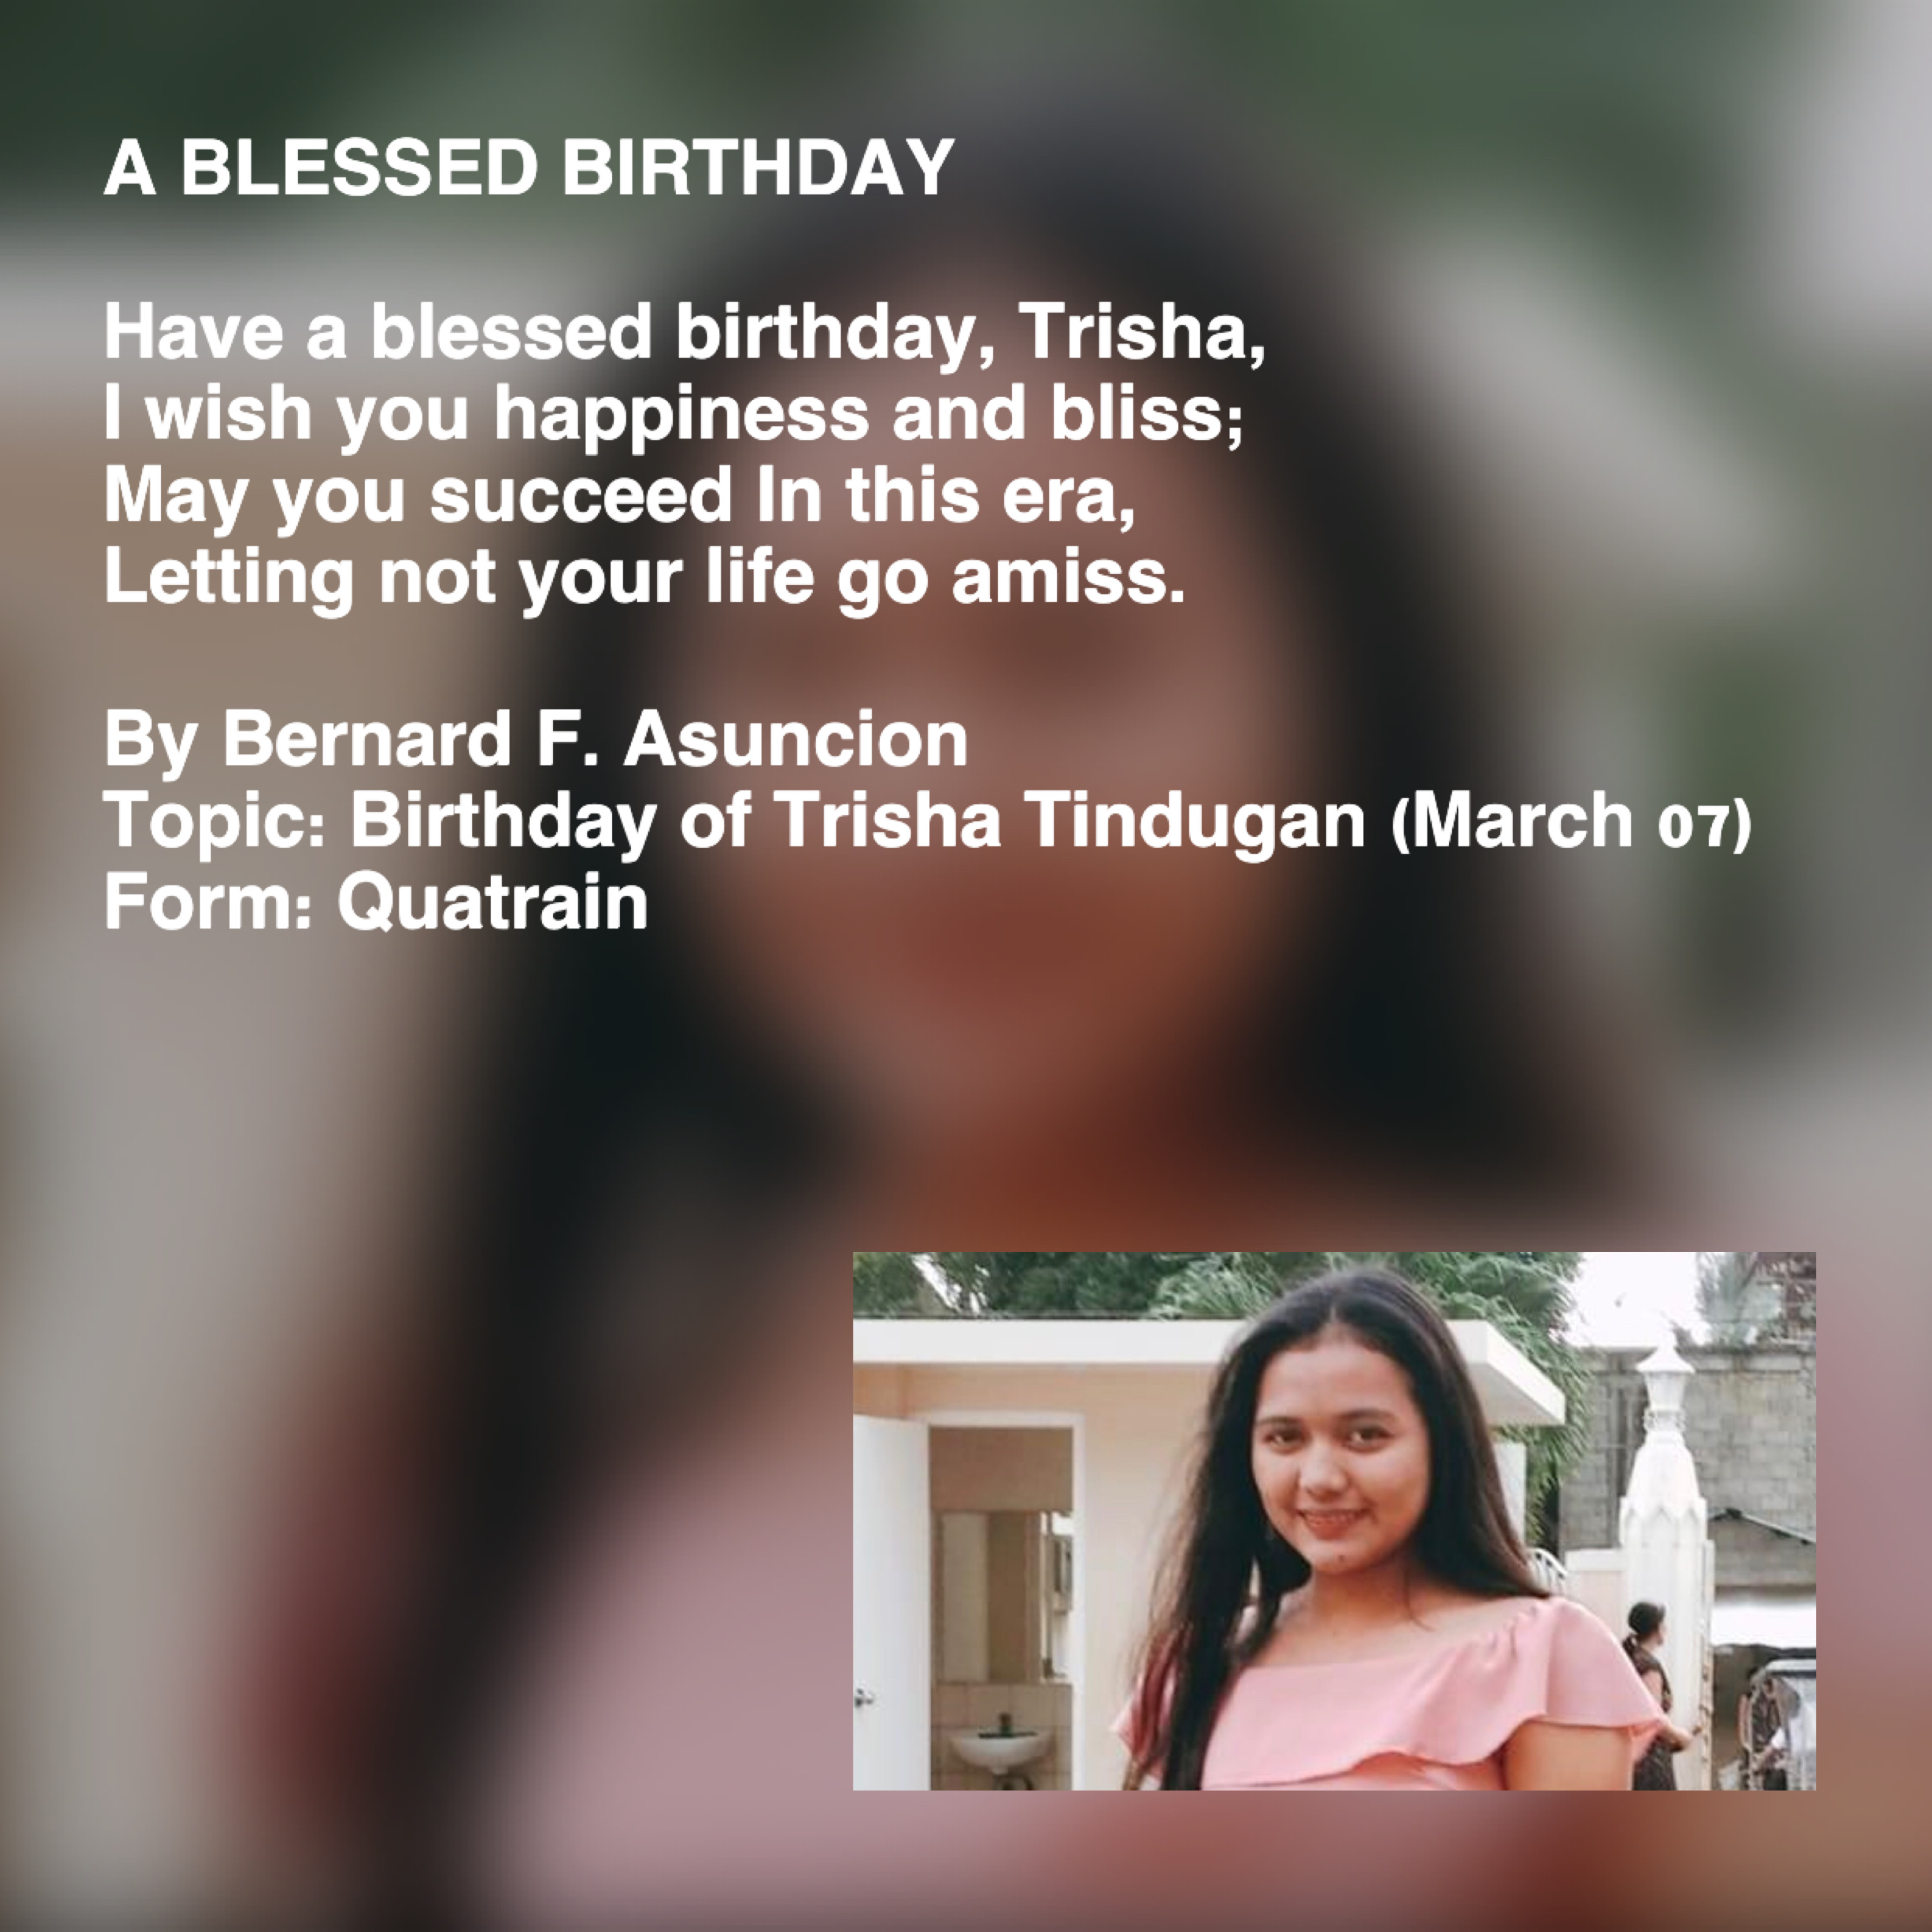 A Blessed Birthday